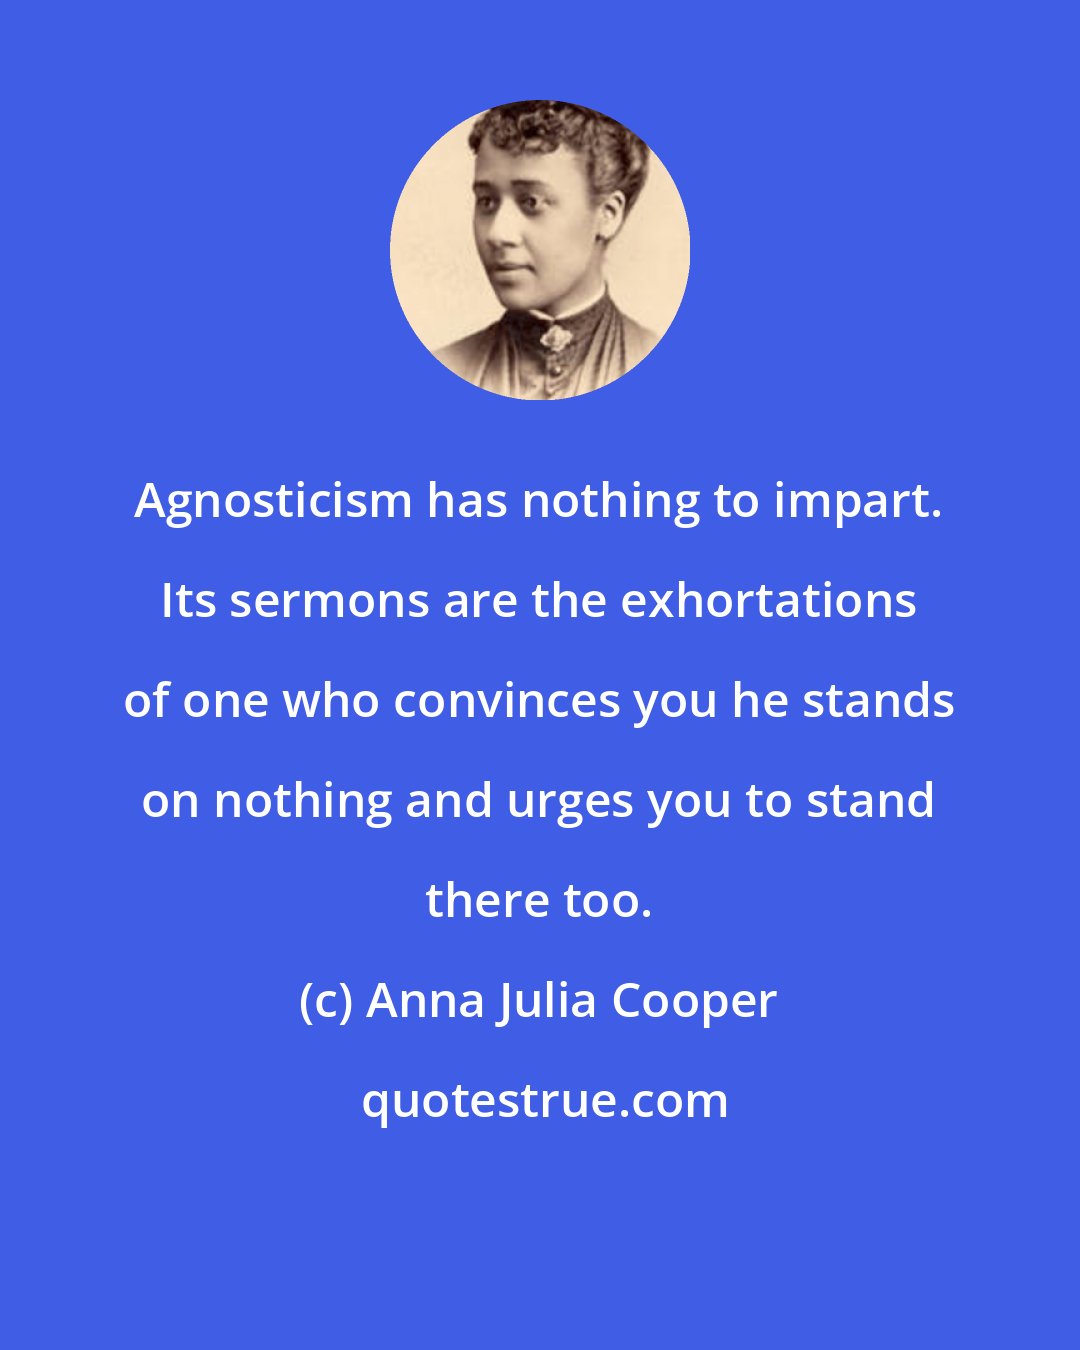 Anna Julia Cooper: Agnosticism has nothing to impart. Its sermons are the exhortations of one who convinces you he stands on nothing and urges you to stand there too.